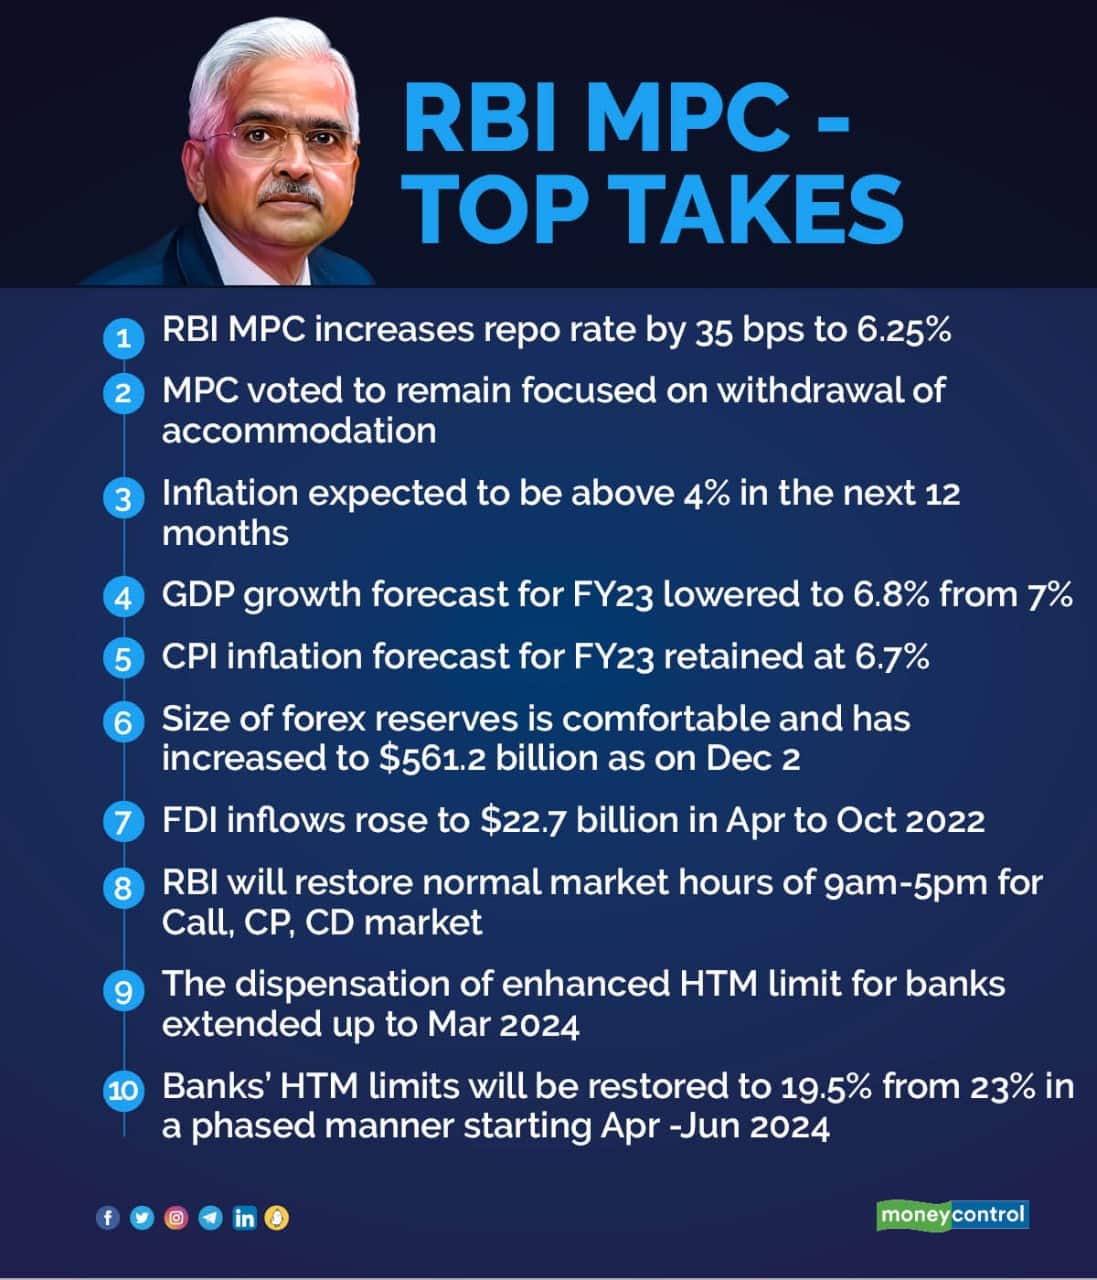 Key Takeaways of the RBI MPC announcement on December 7